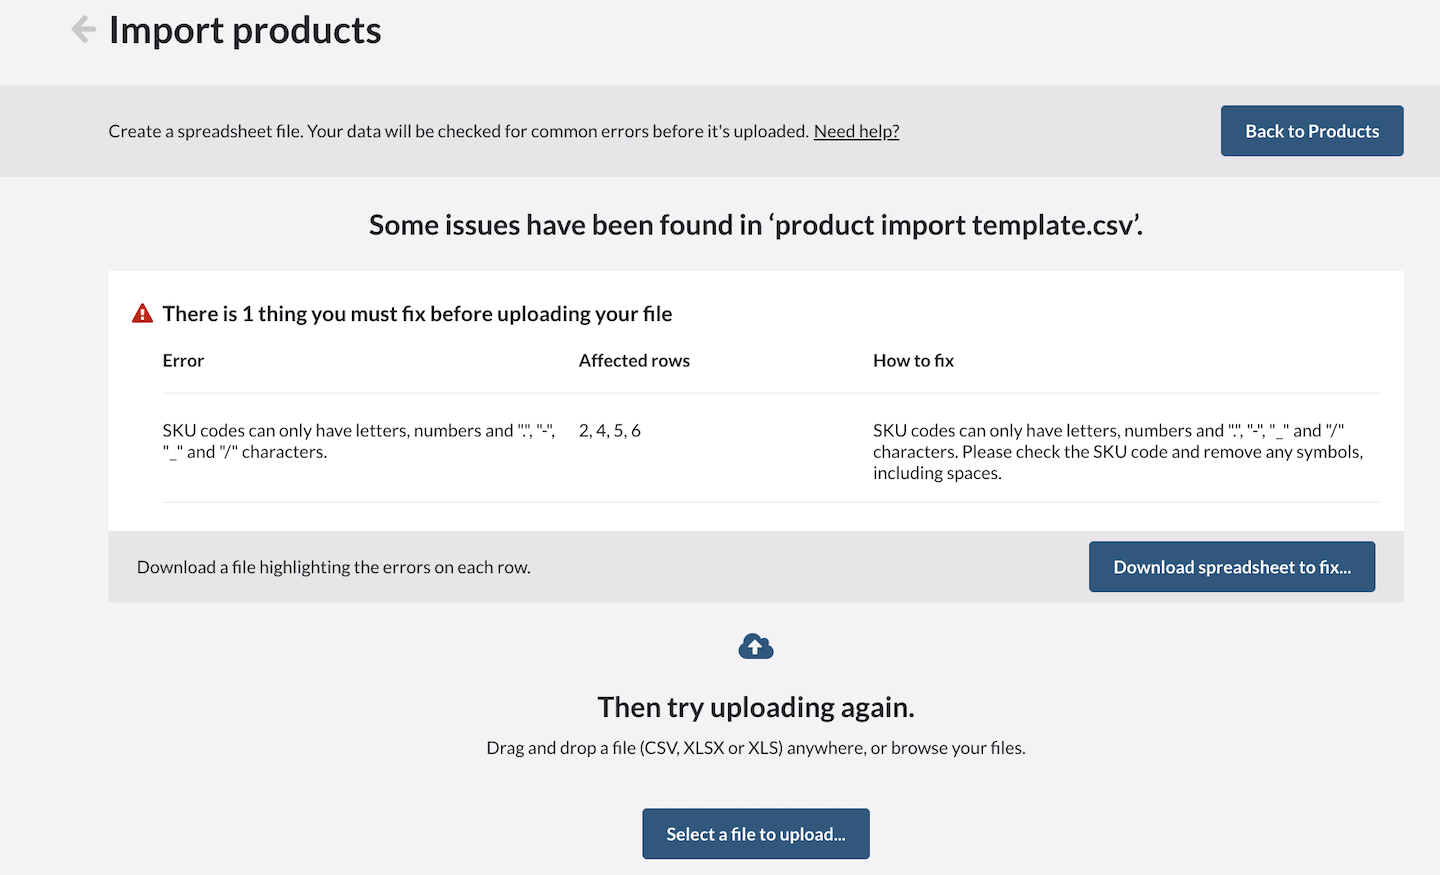 Error page stating that some SKUs contain inappropriate characters.